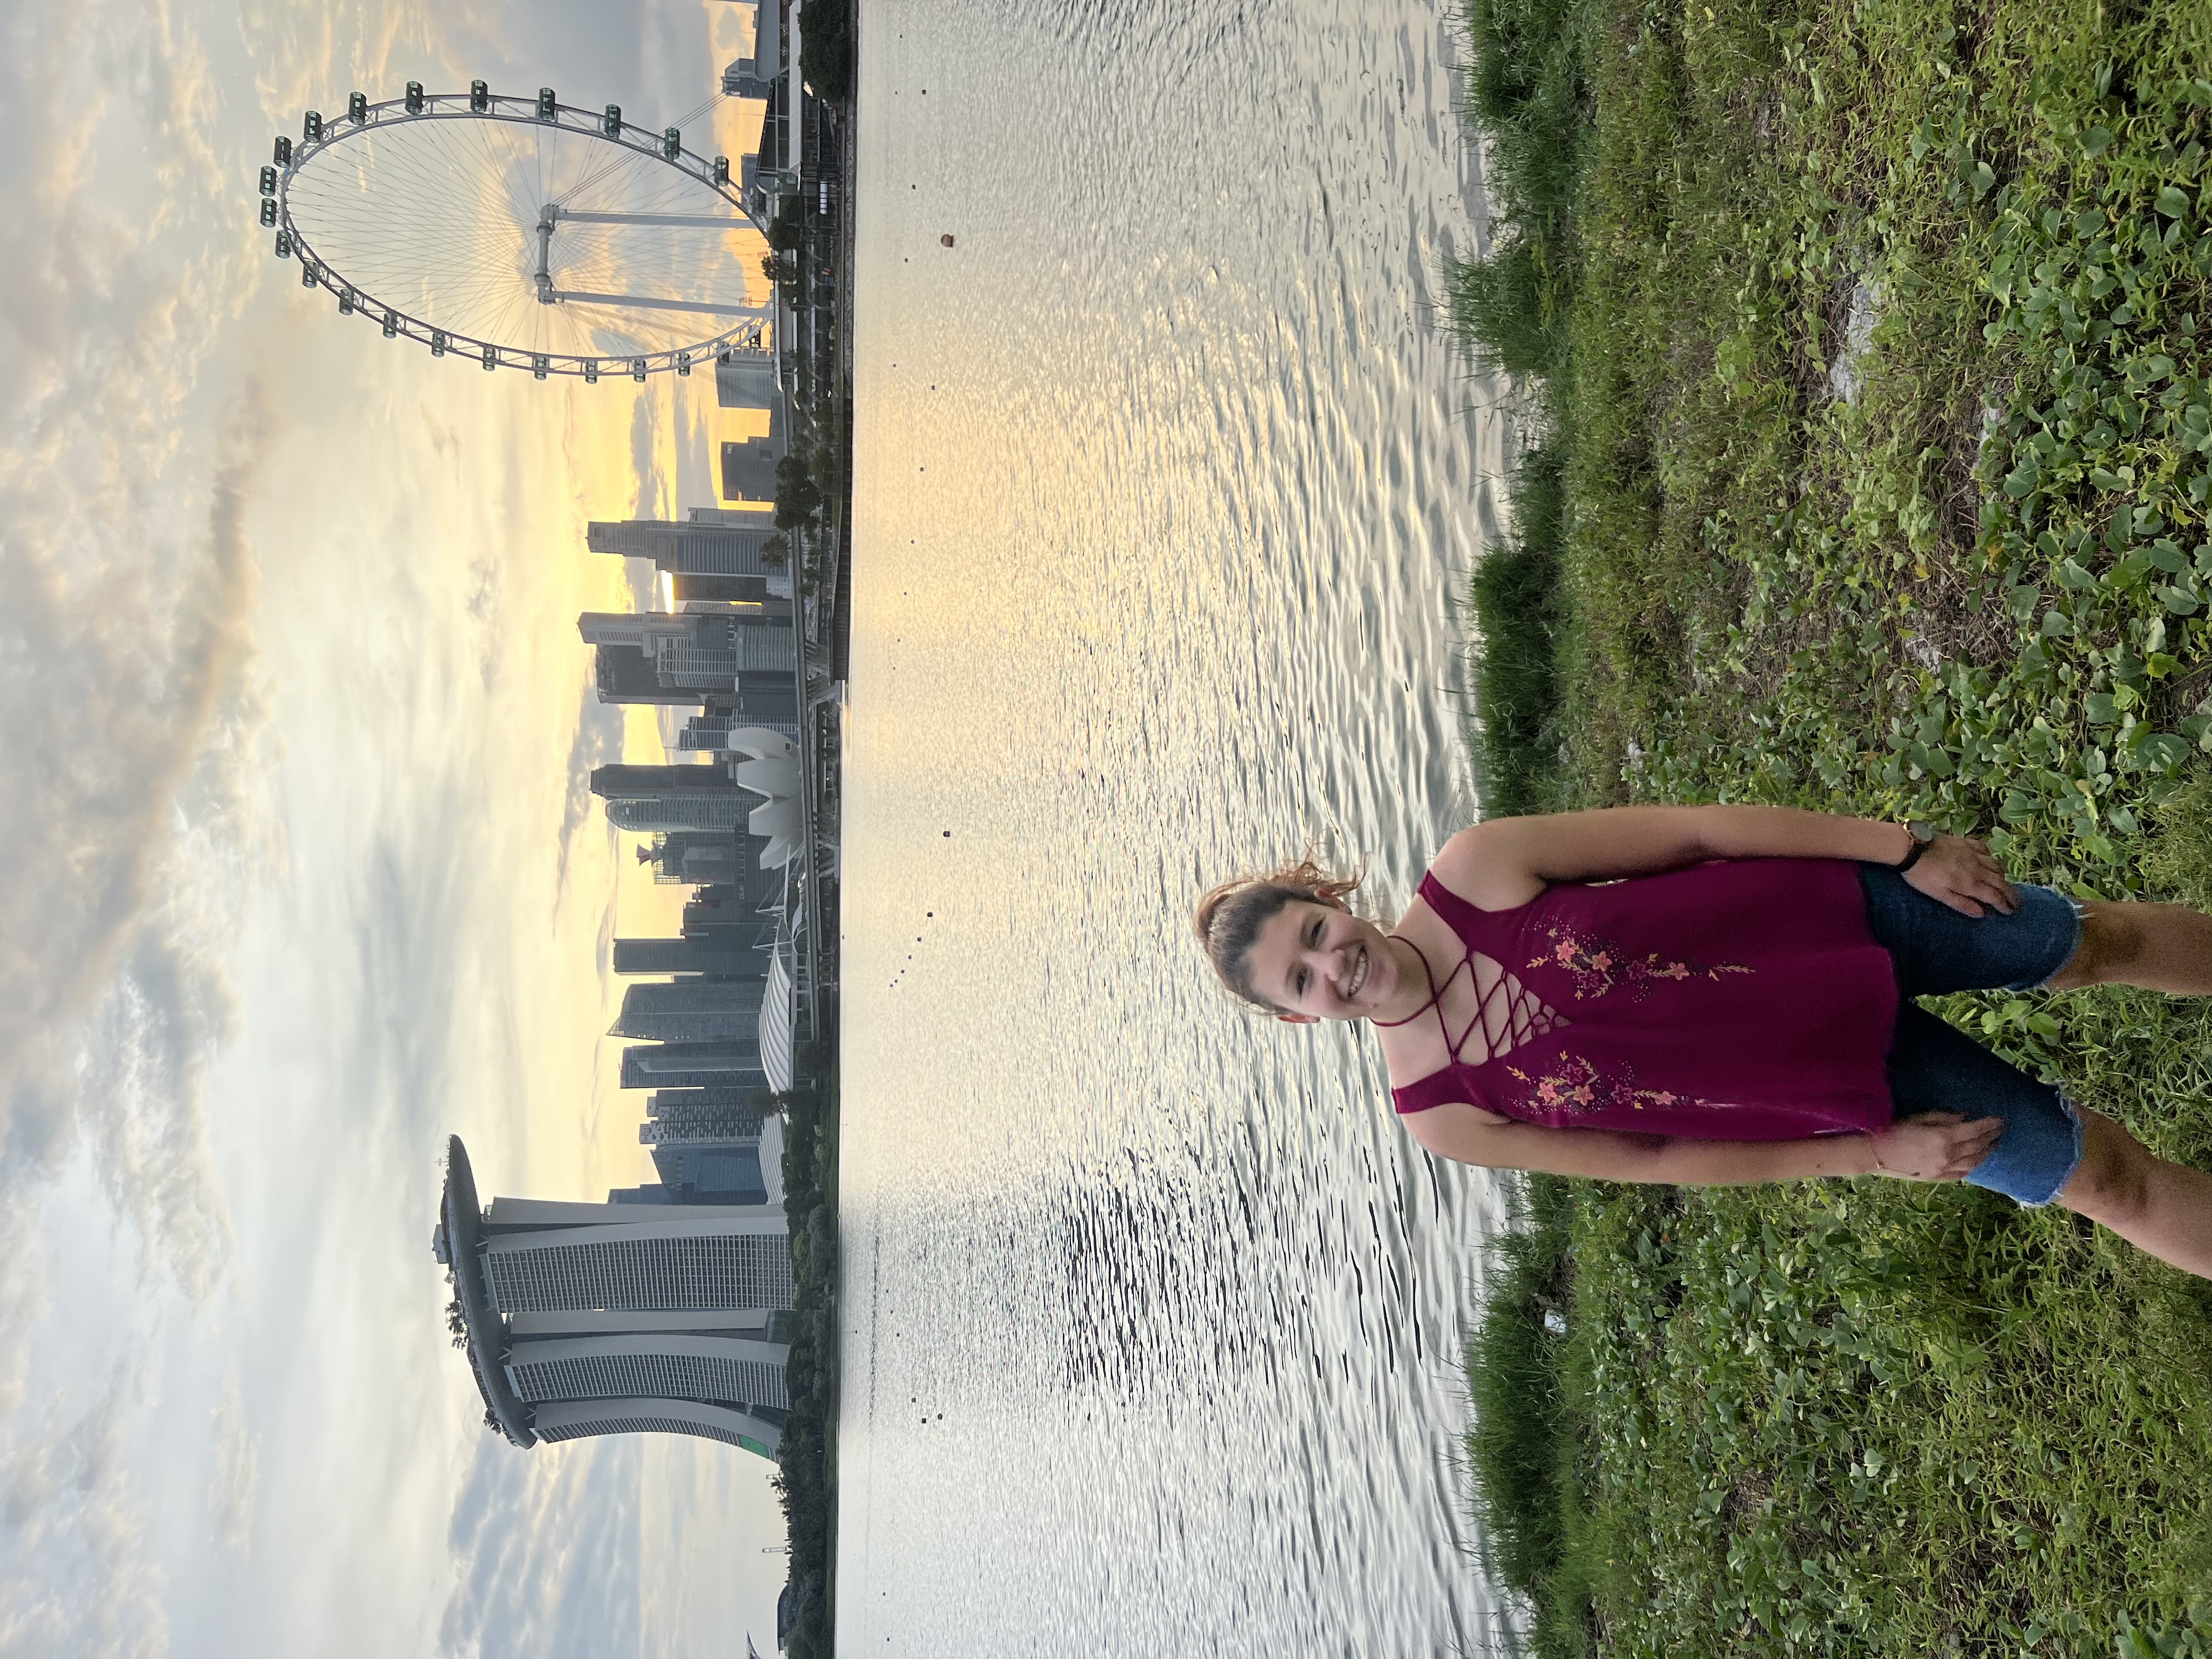 Kristina standing in front of Singapore’s iconic skyline featuring Marina Bay Sands and the Singapore Flyer. While researching Entropica Labs, she read up about Singapore and was excited about moving to a place that many people had spoken highly of.